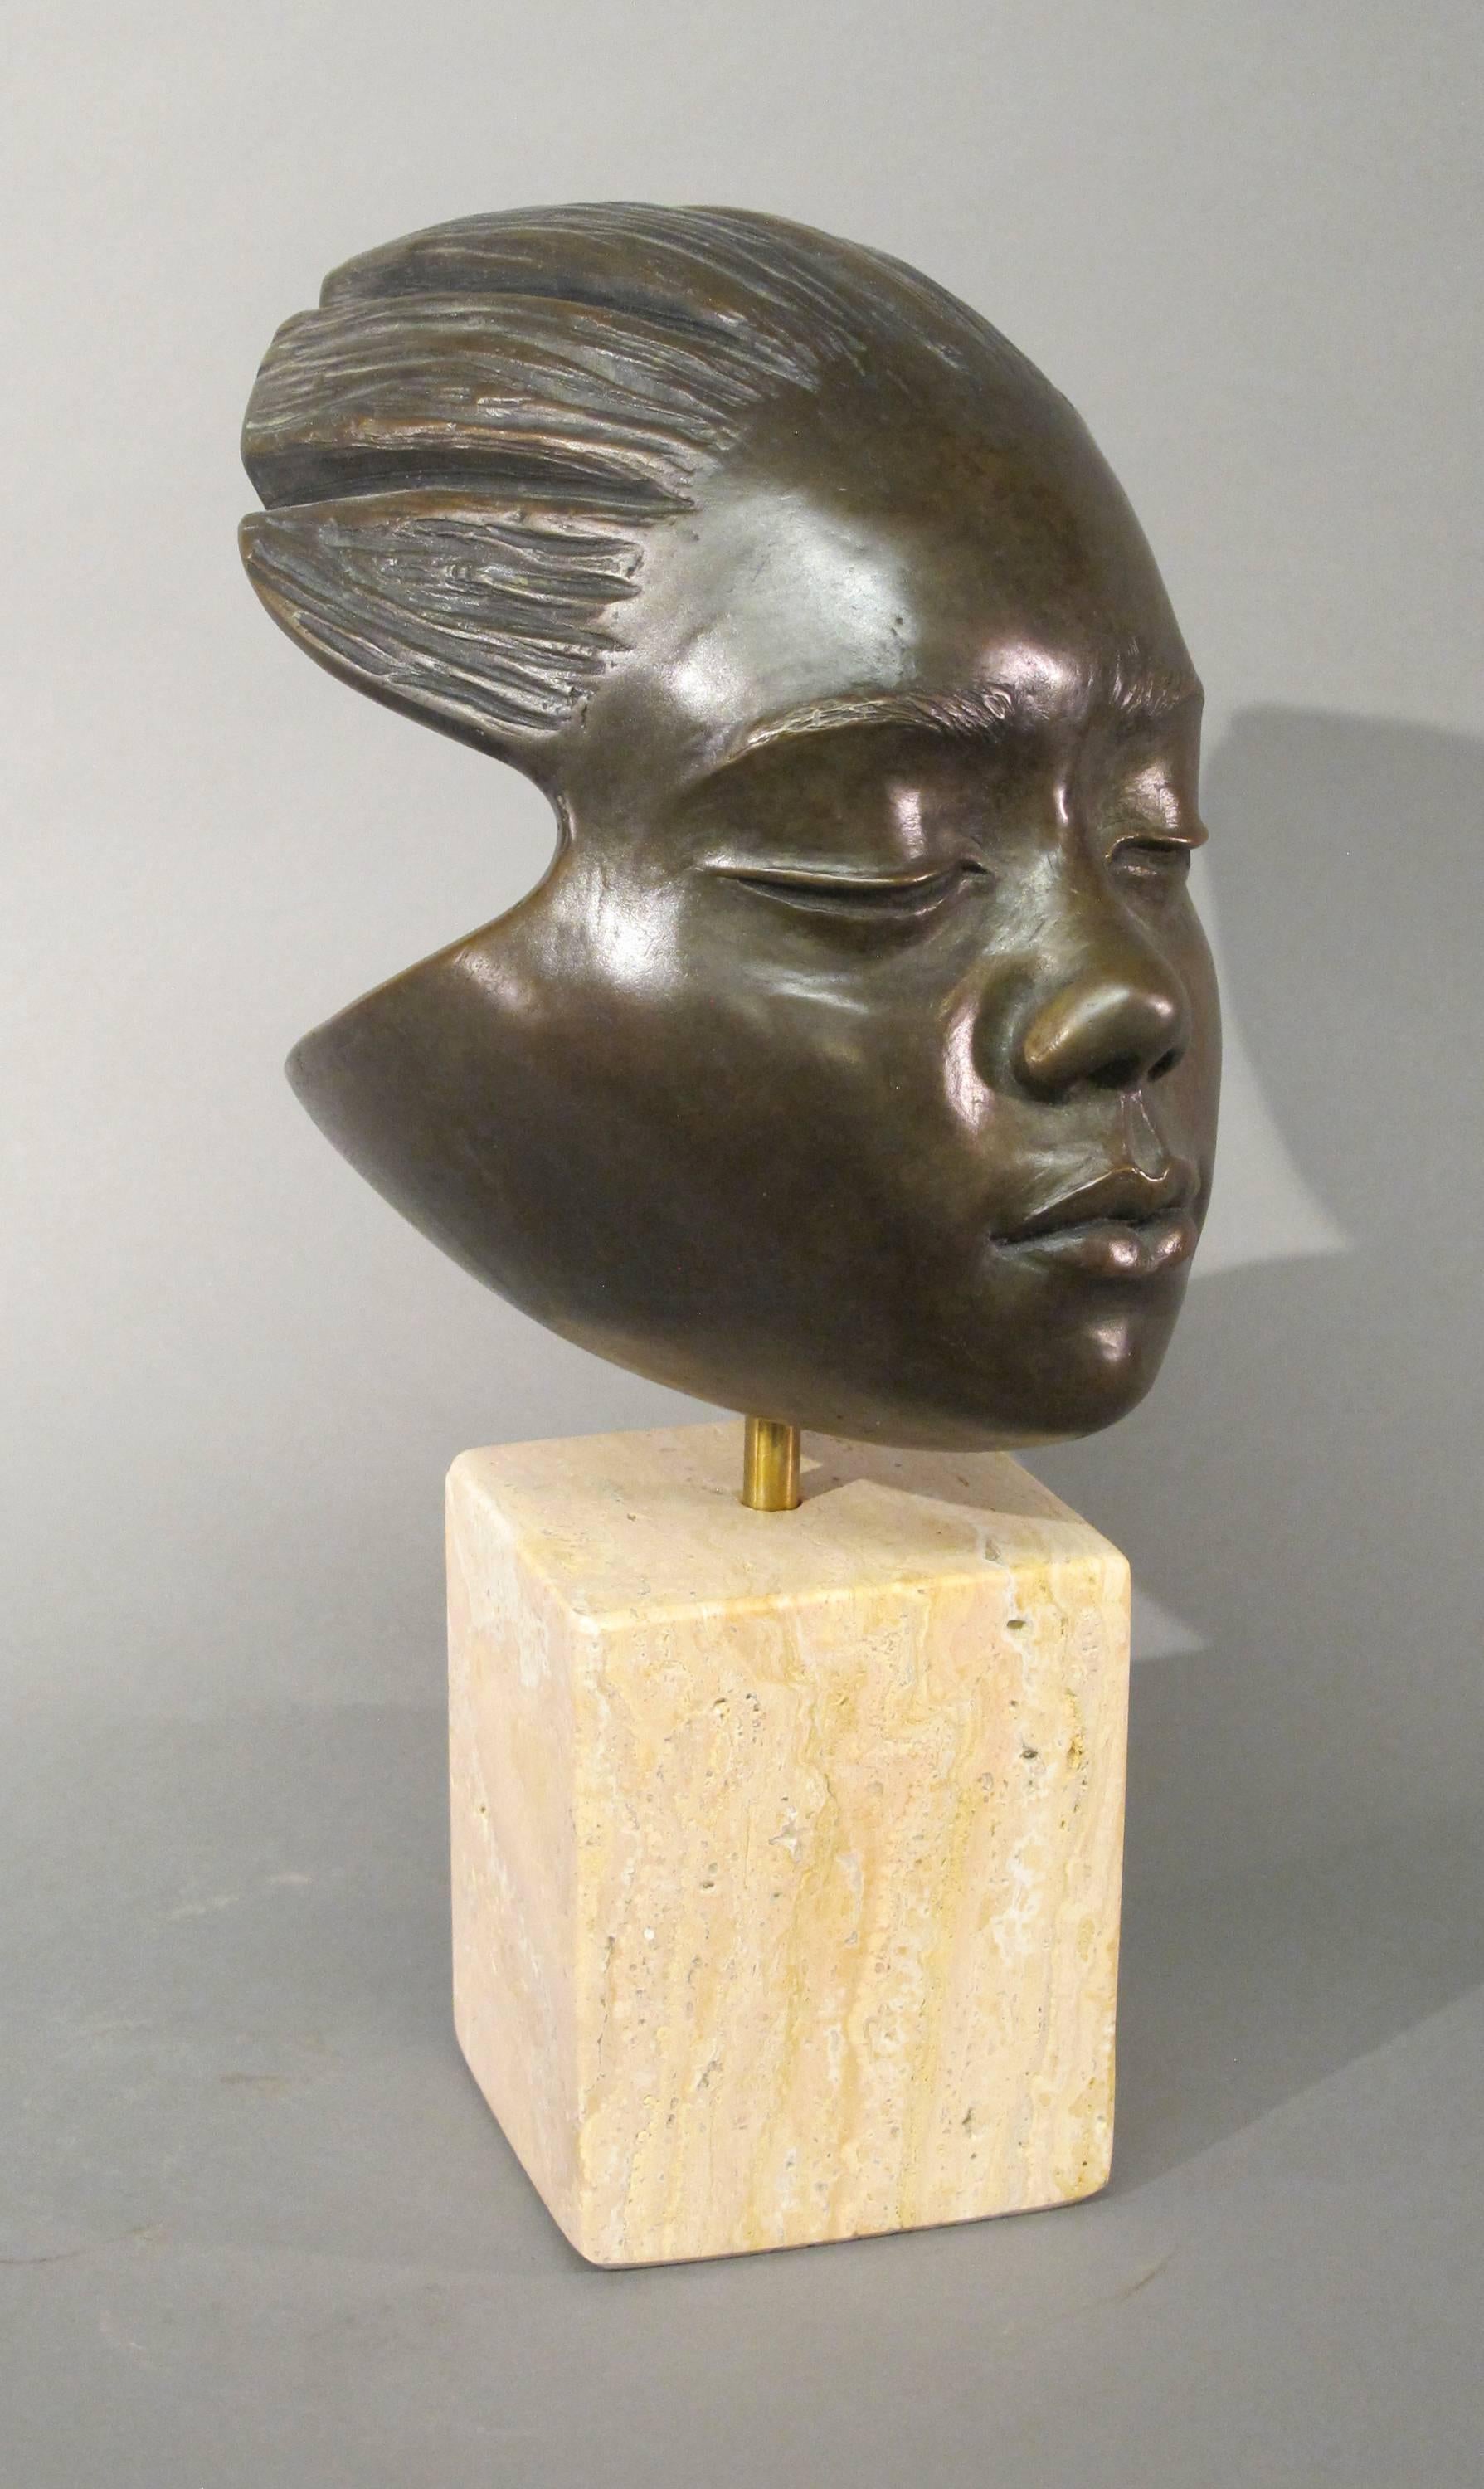 Listen - Contemporary Sculpture by Troy Williams